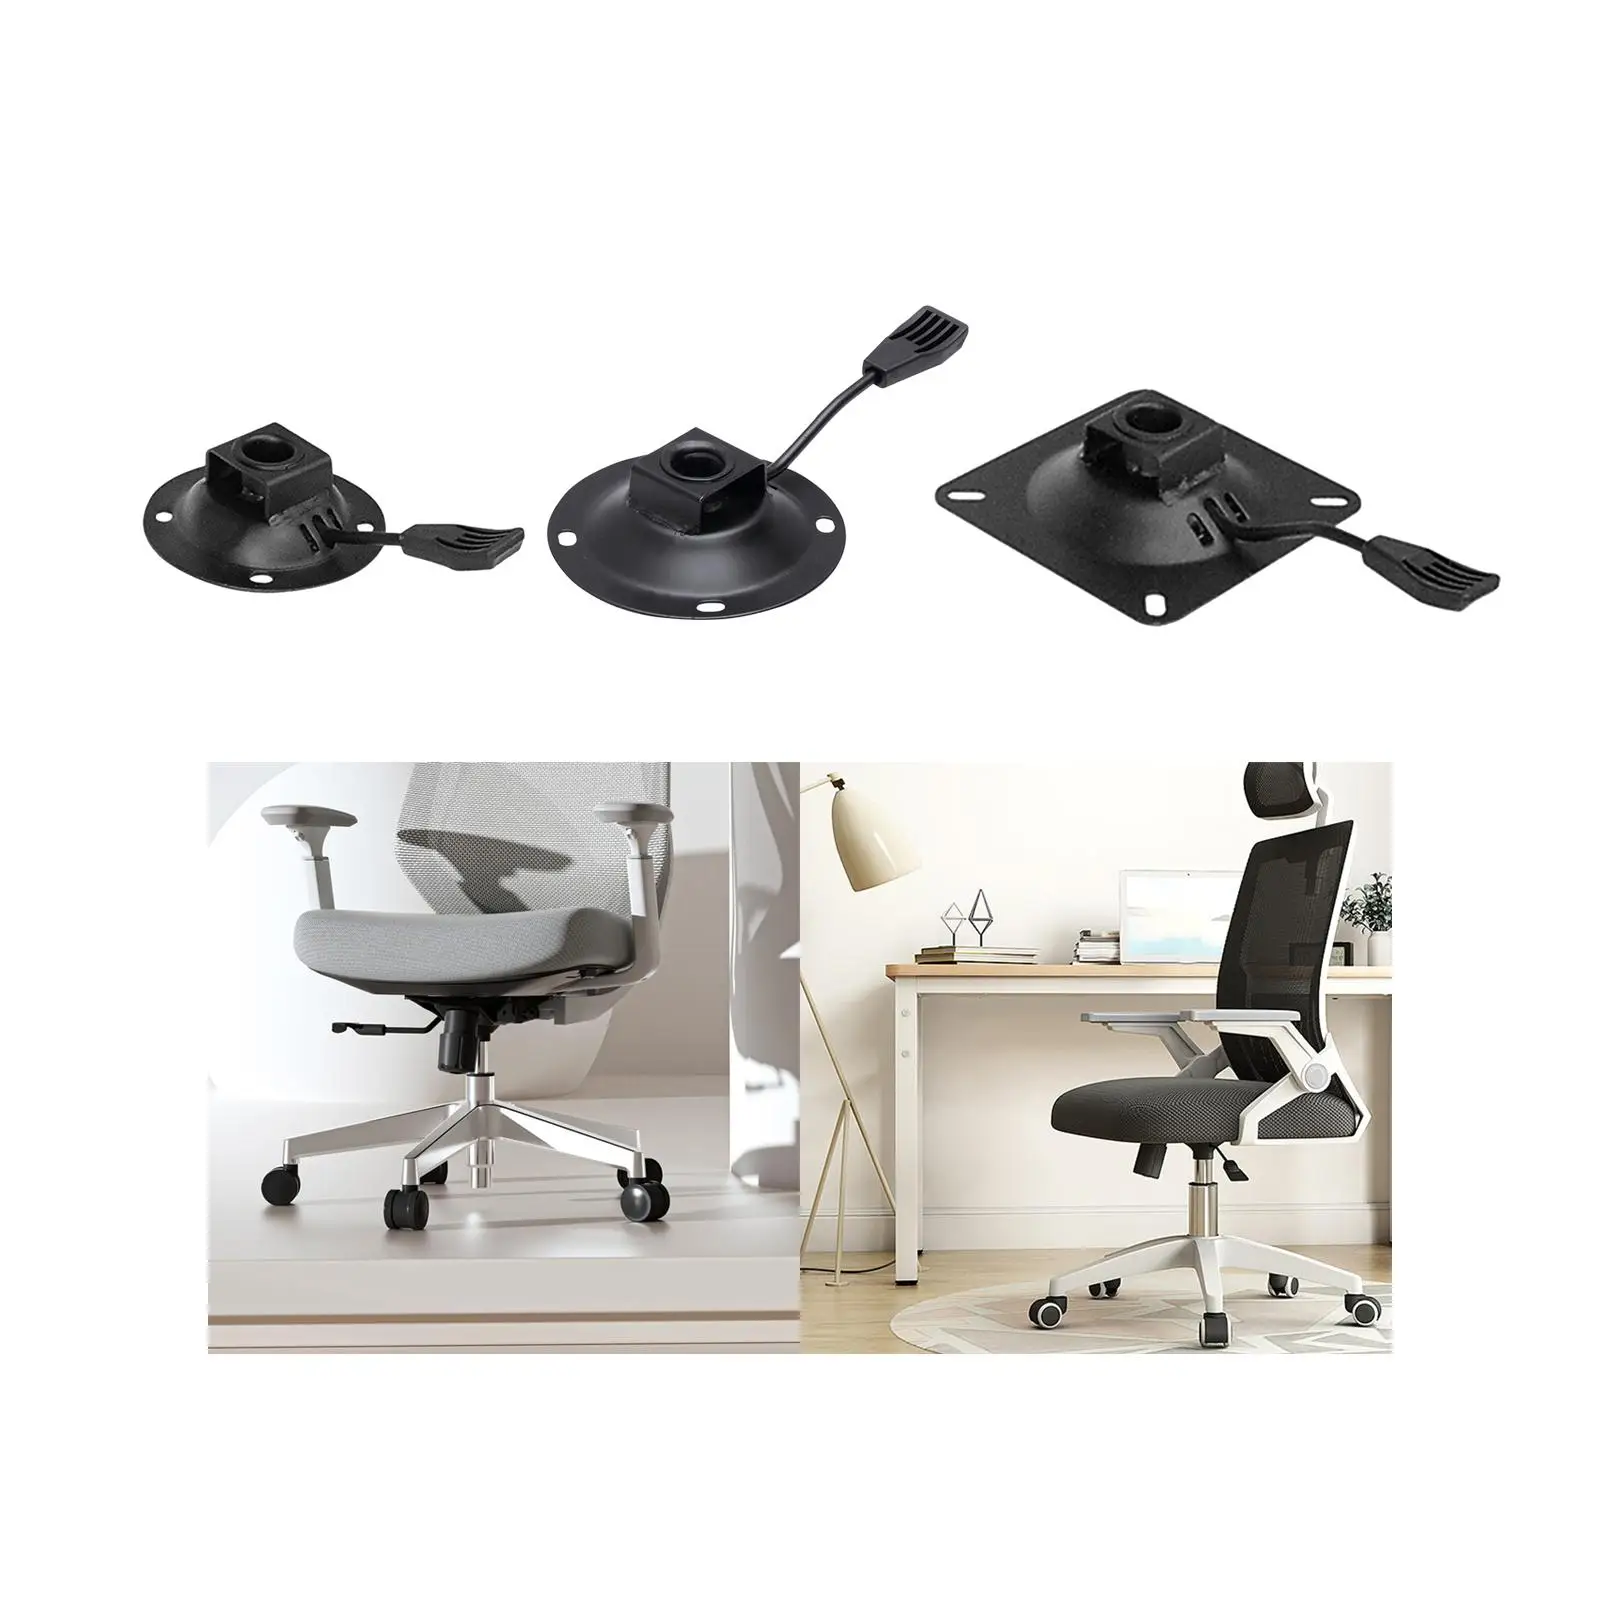 Office Chair Tilt Control Seat Mechanism Chair Swivel Base Plate Heavy Duty for Gaming Chairs Bar Stool Office Chairs Furniture